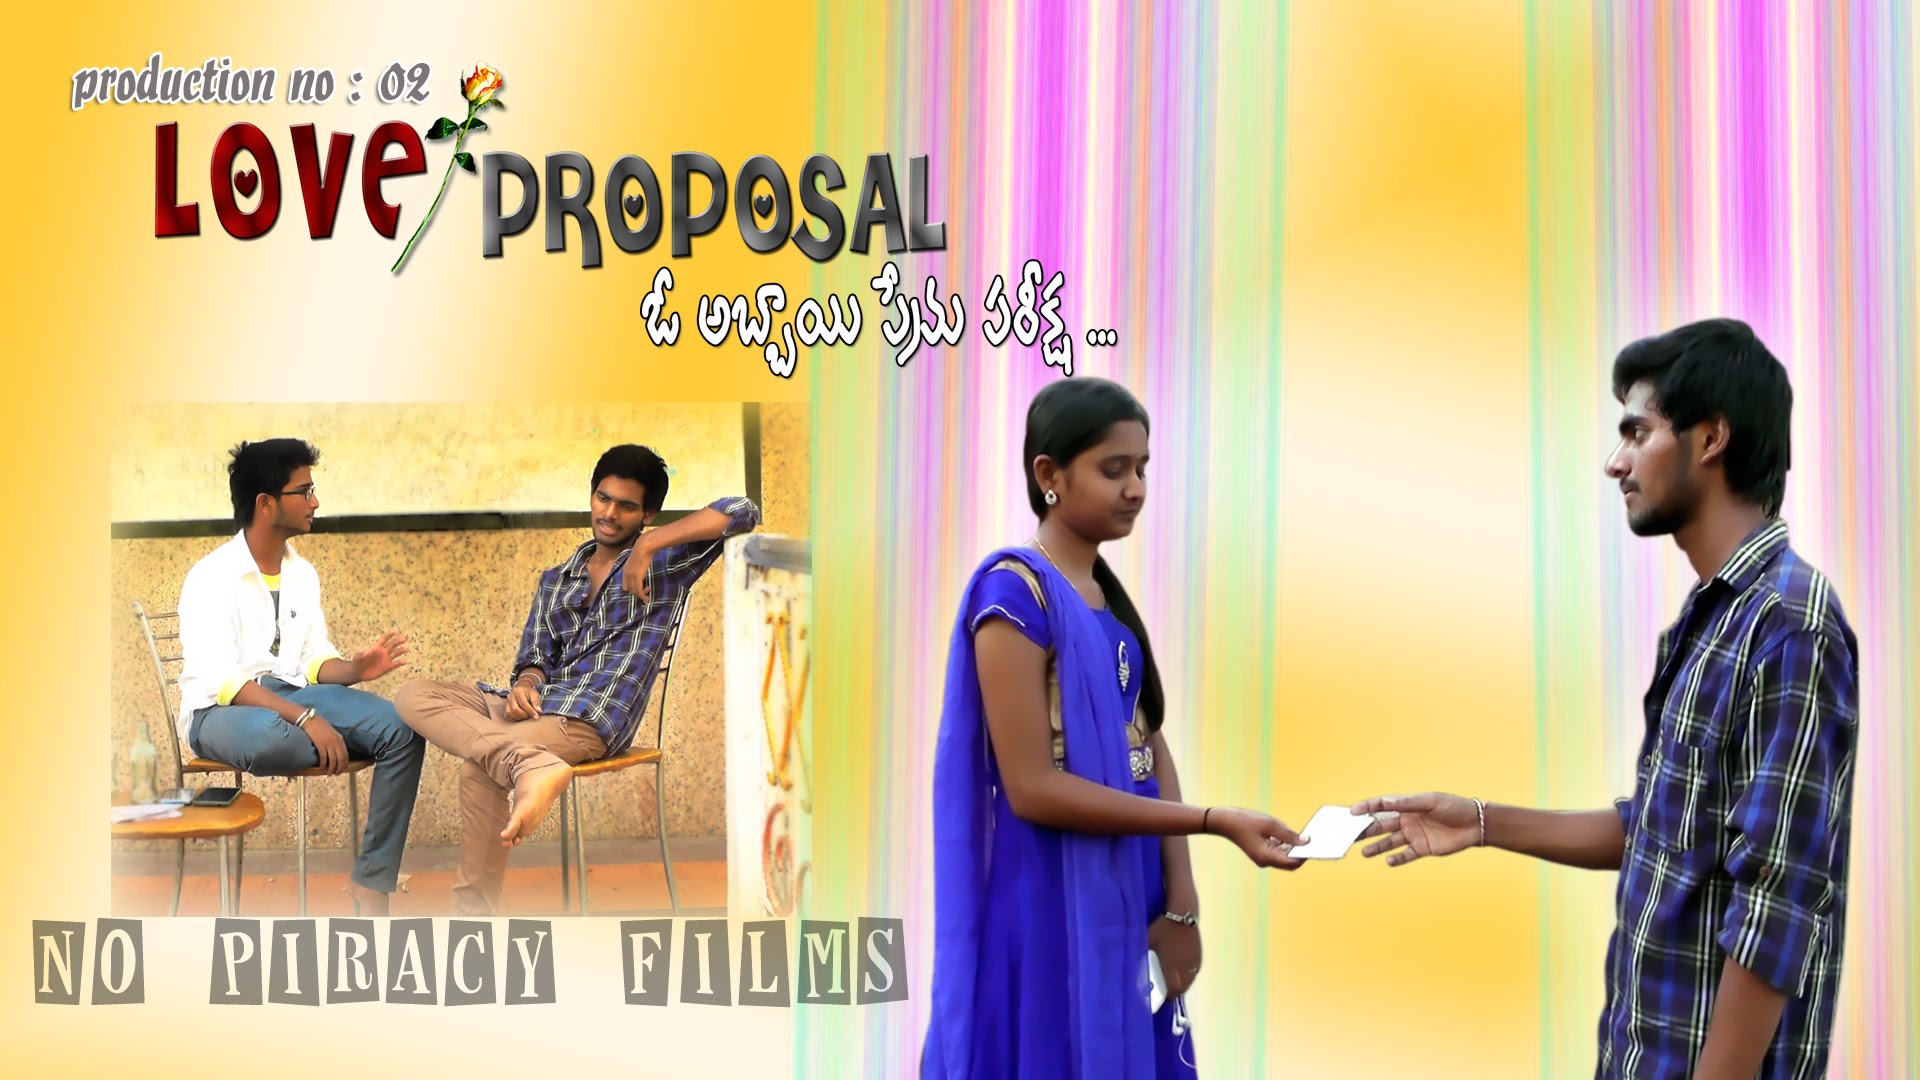 Free download Love Propose Wallpaper Hd Love Proposal Images Hd Telugu Hd  [1920x1080] for your Desktop, Mobile & Tablet | Explore 36+ Proposing Love  Wallpapers | Love Background, Backgrounds Love, Love Backgrounds